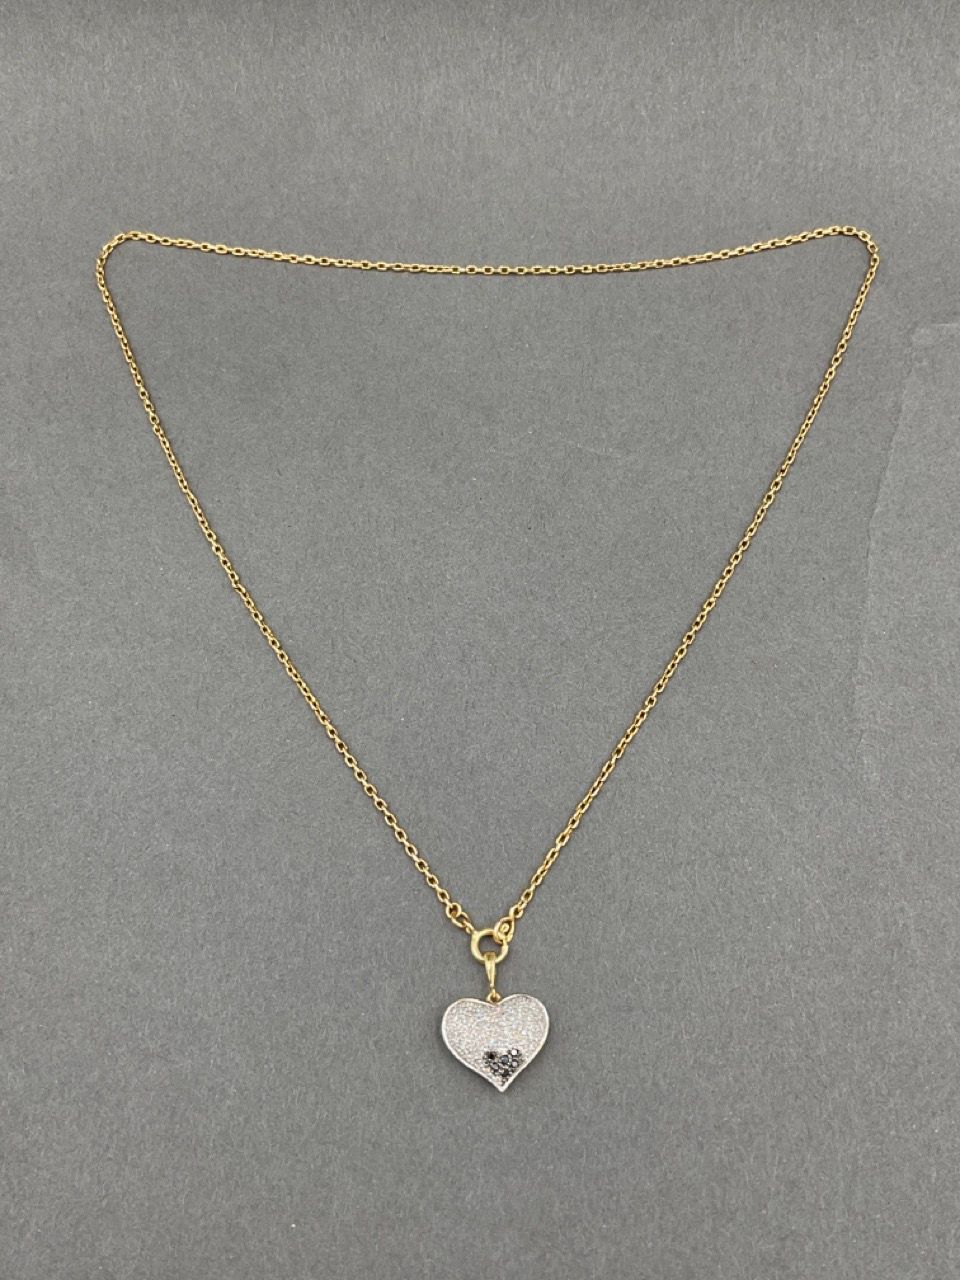 Null NECKLACE in yellow gold 18K 750/°° decorated with a heart-shaped pendant se&hellip;